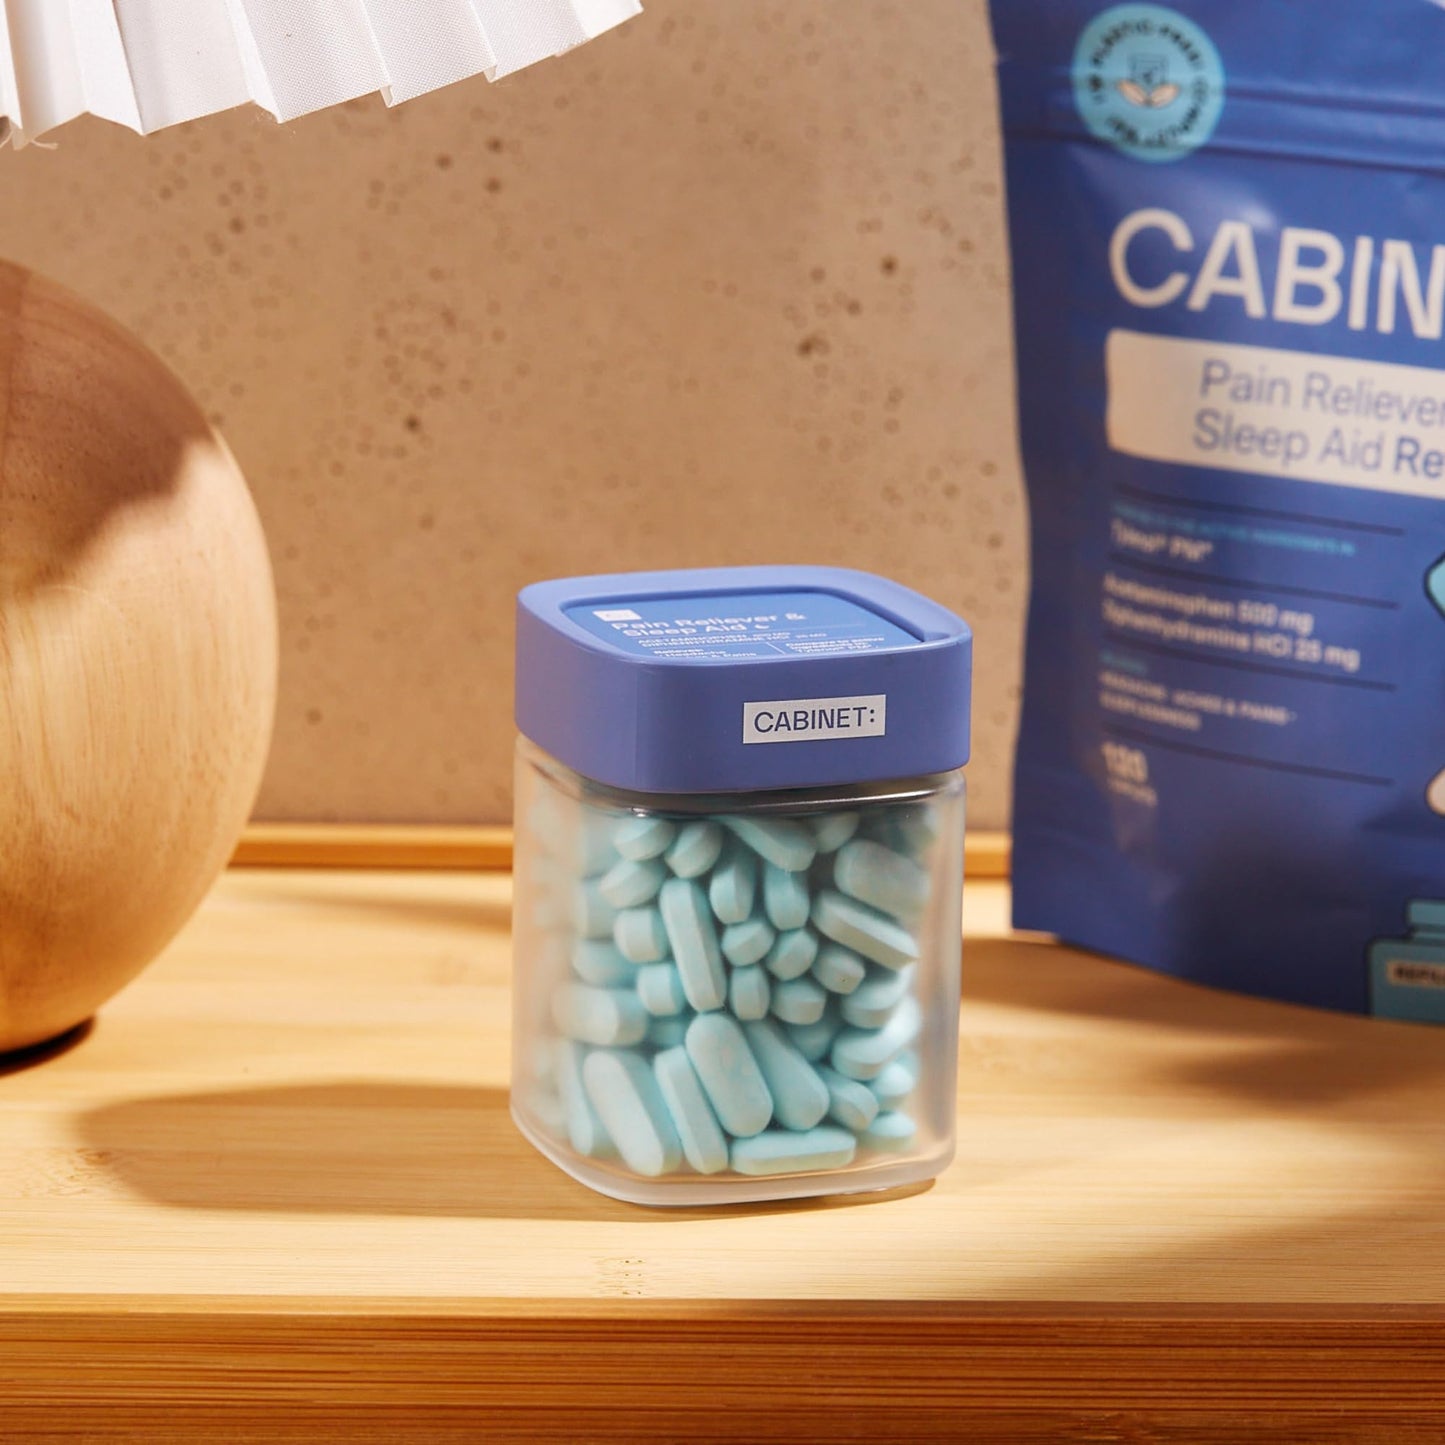 Cabinet Nighttime Pain Reliever and Sleep Aid